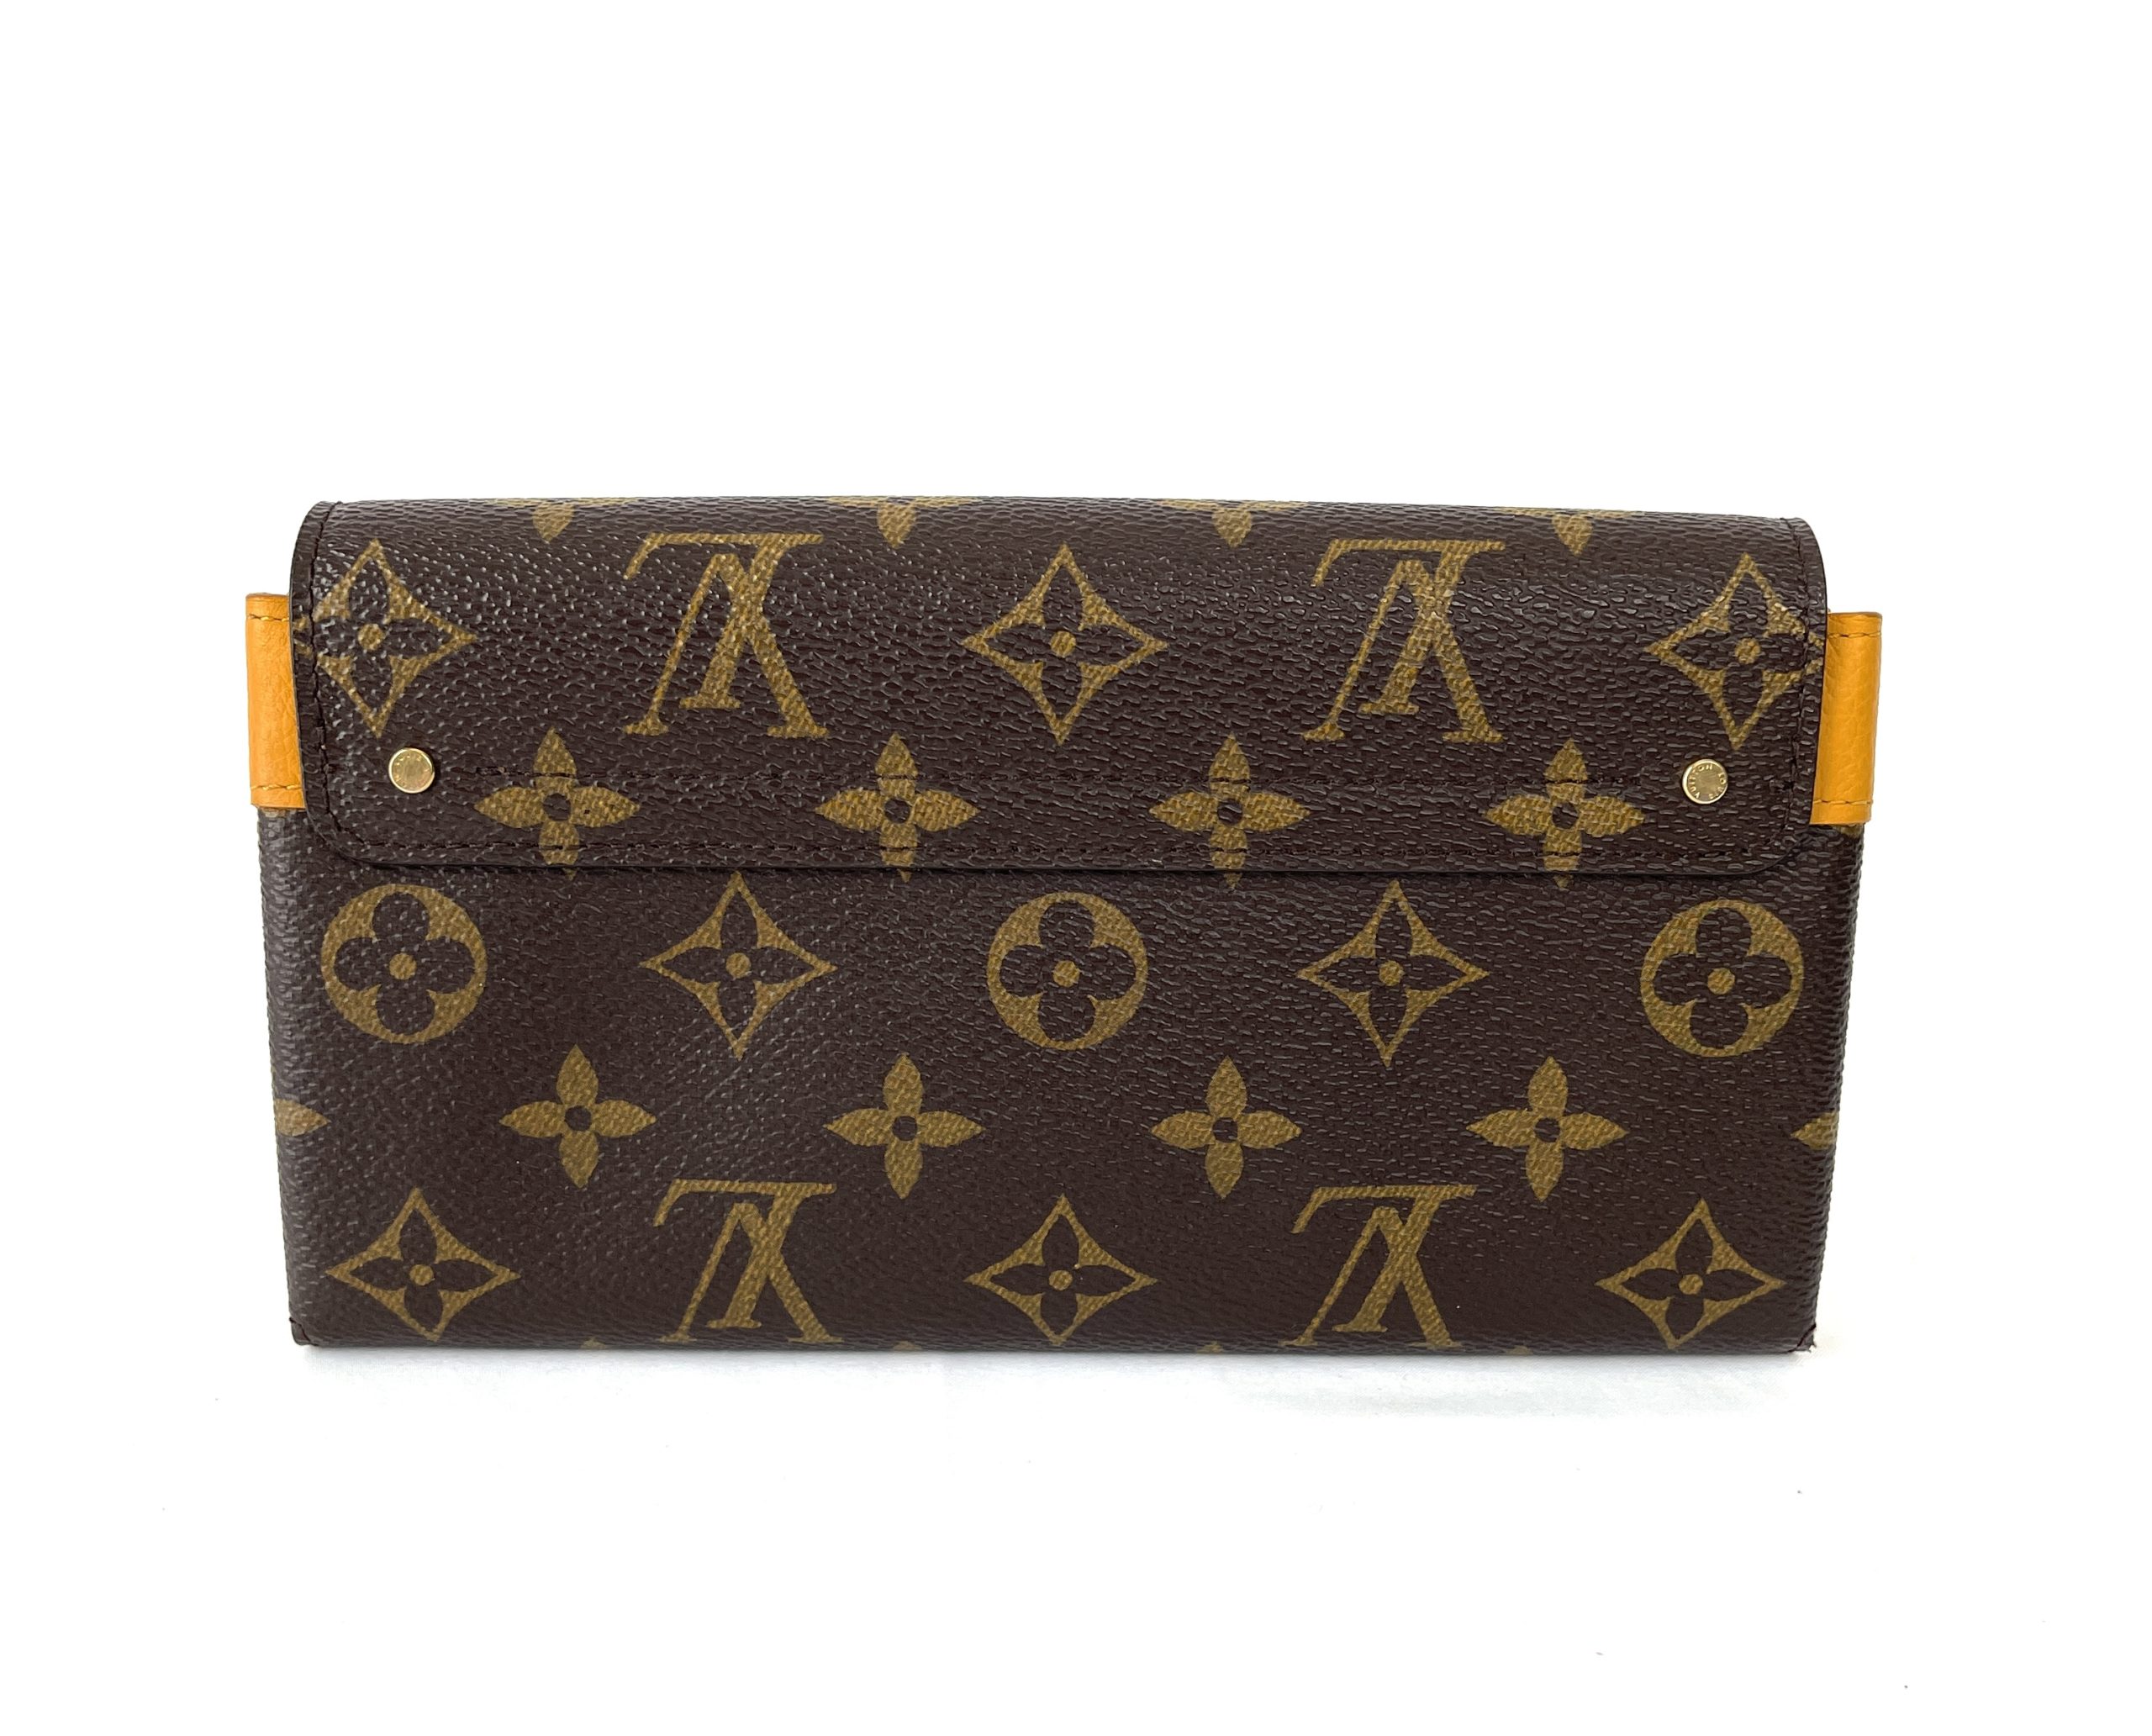 LOUIS VUITTON ELYSEE MONOGRAM WALLET, with gold tone clasp at the front and  red partitioned leather interior with a central zippered pocket and twelve  card slot panels, with dust bag, box and